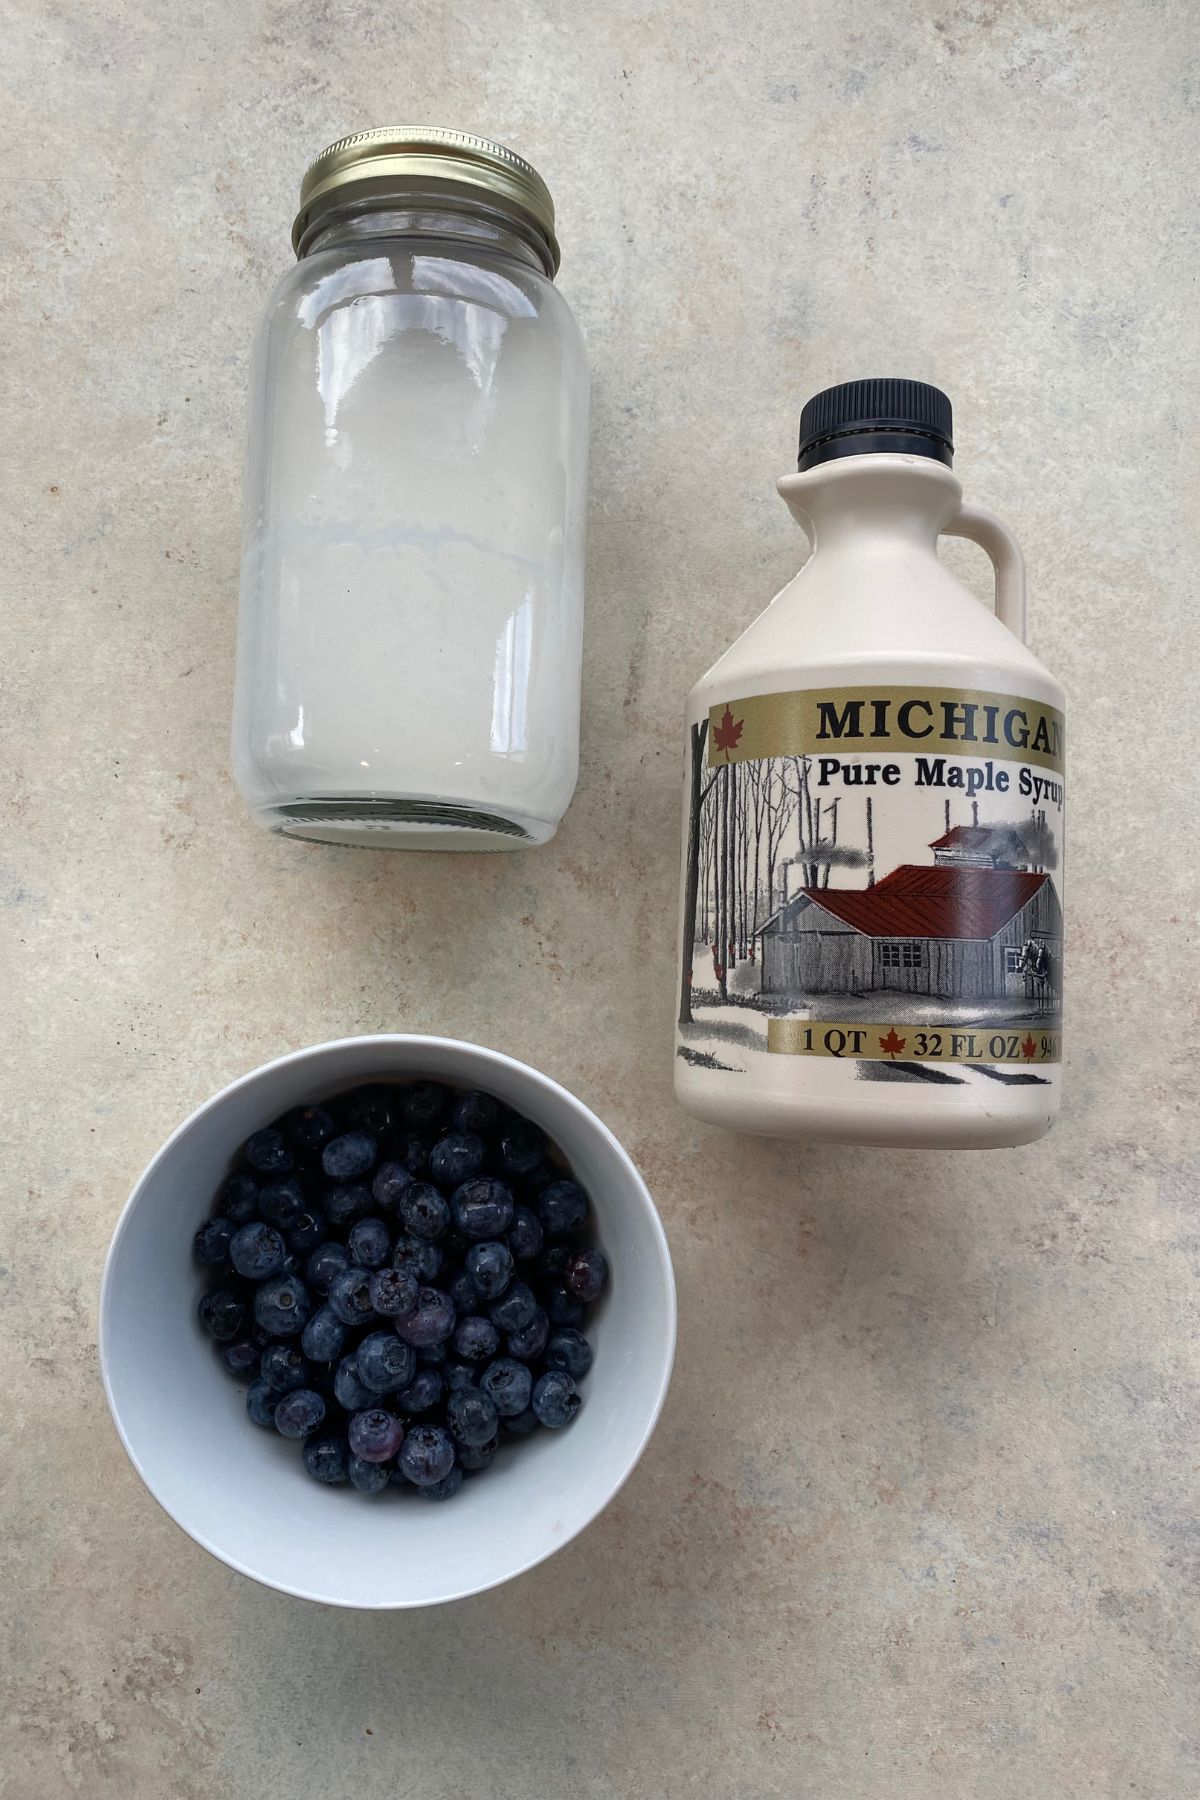 A jar of blueberries and a jar of milk combined to create a delicious blueberry ice cream.